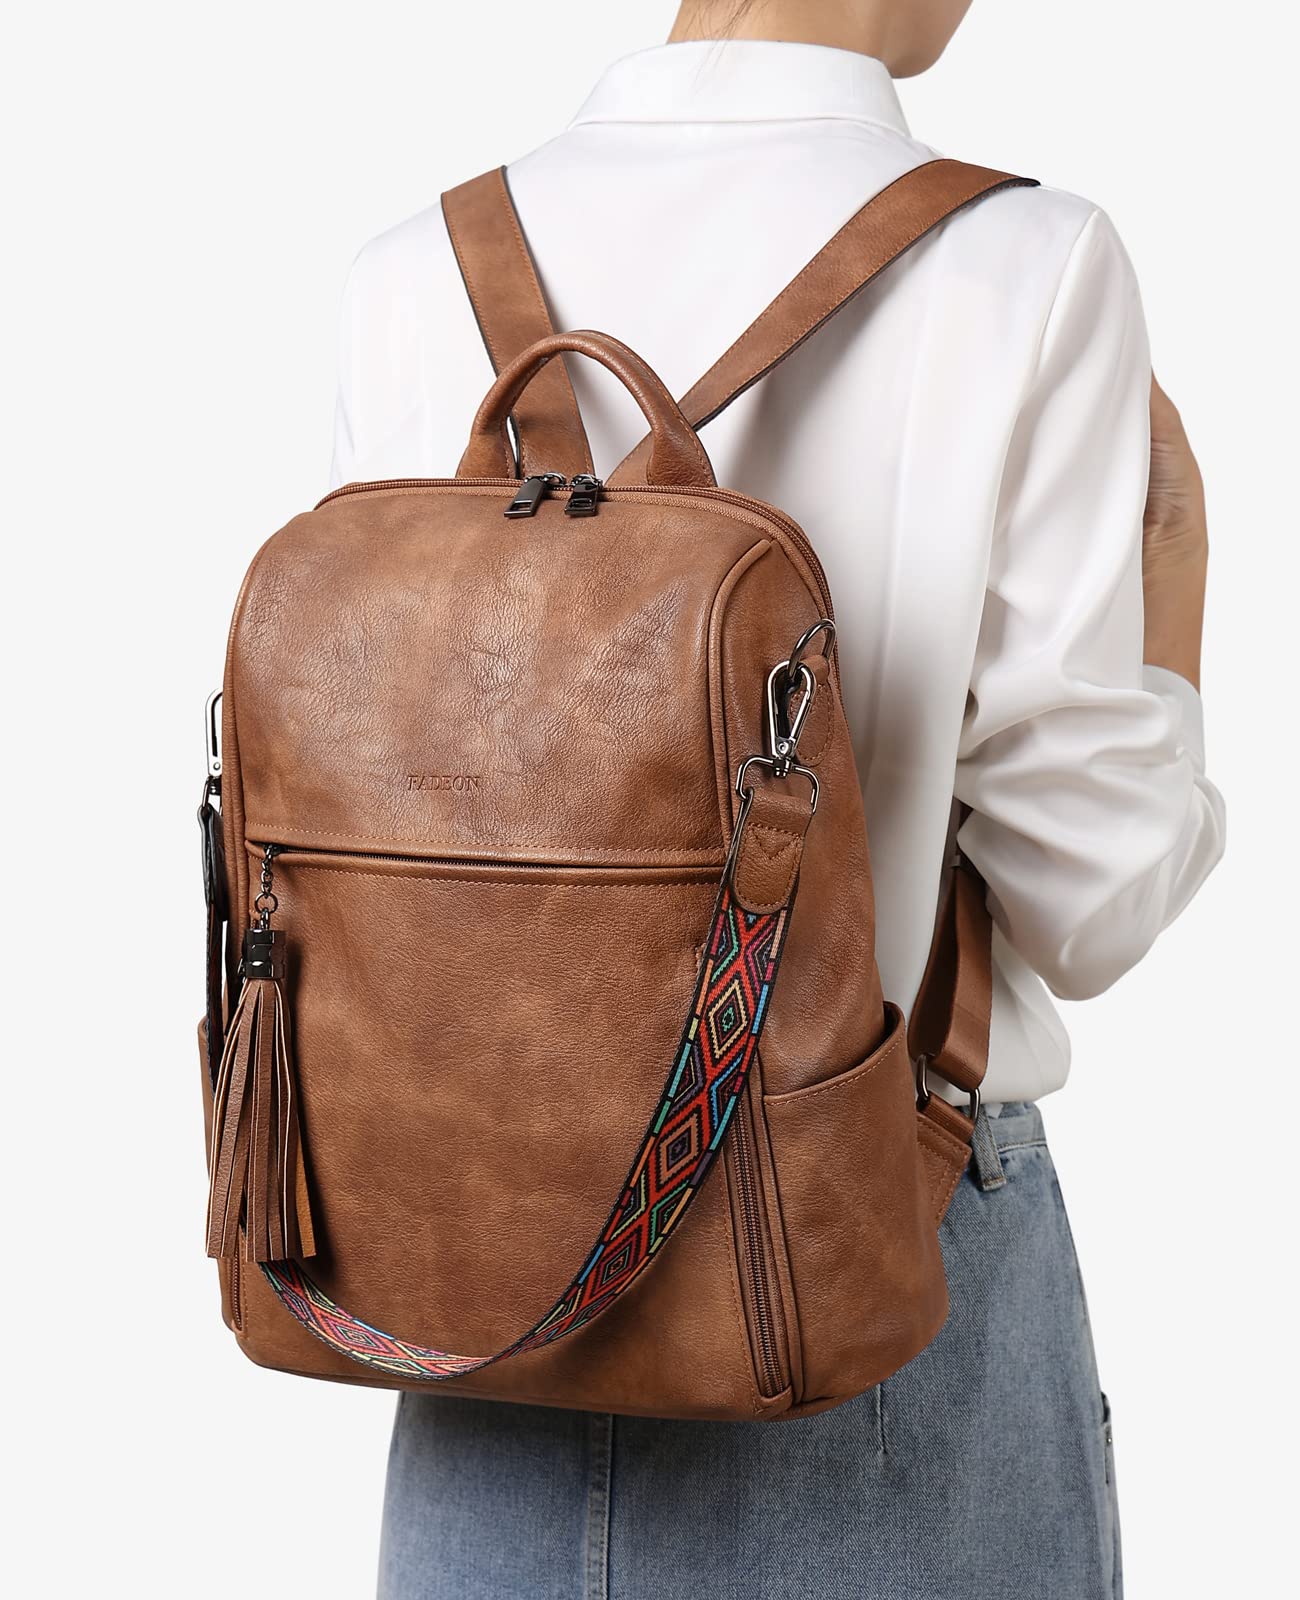 FADEON Leather Backpack Purse for Women Designer Ladies Shoulder Book Bag Fashion PU Convertible Travel Backpack Purses